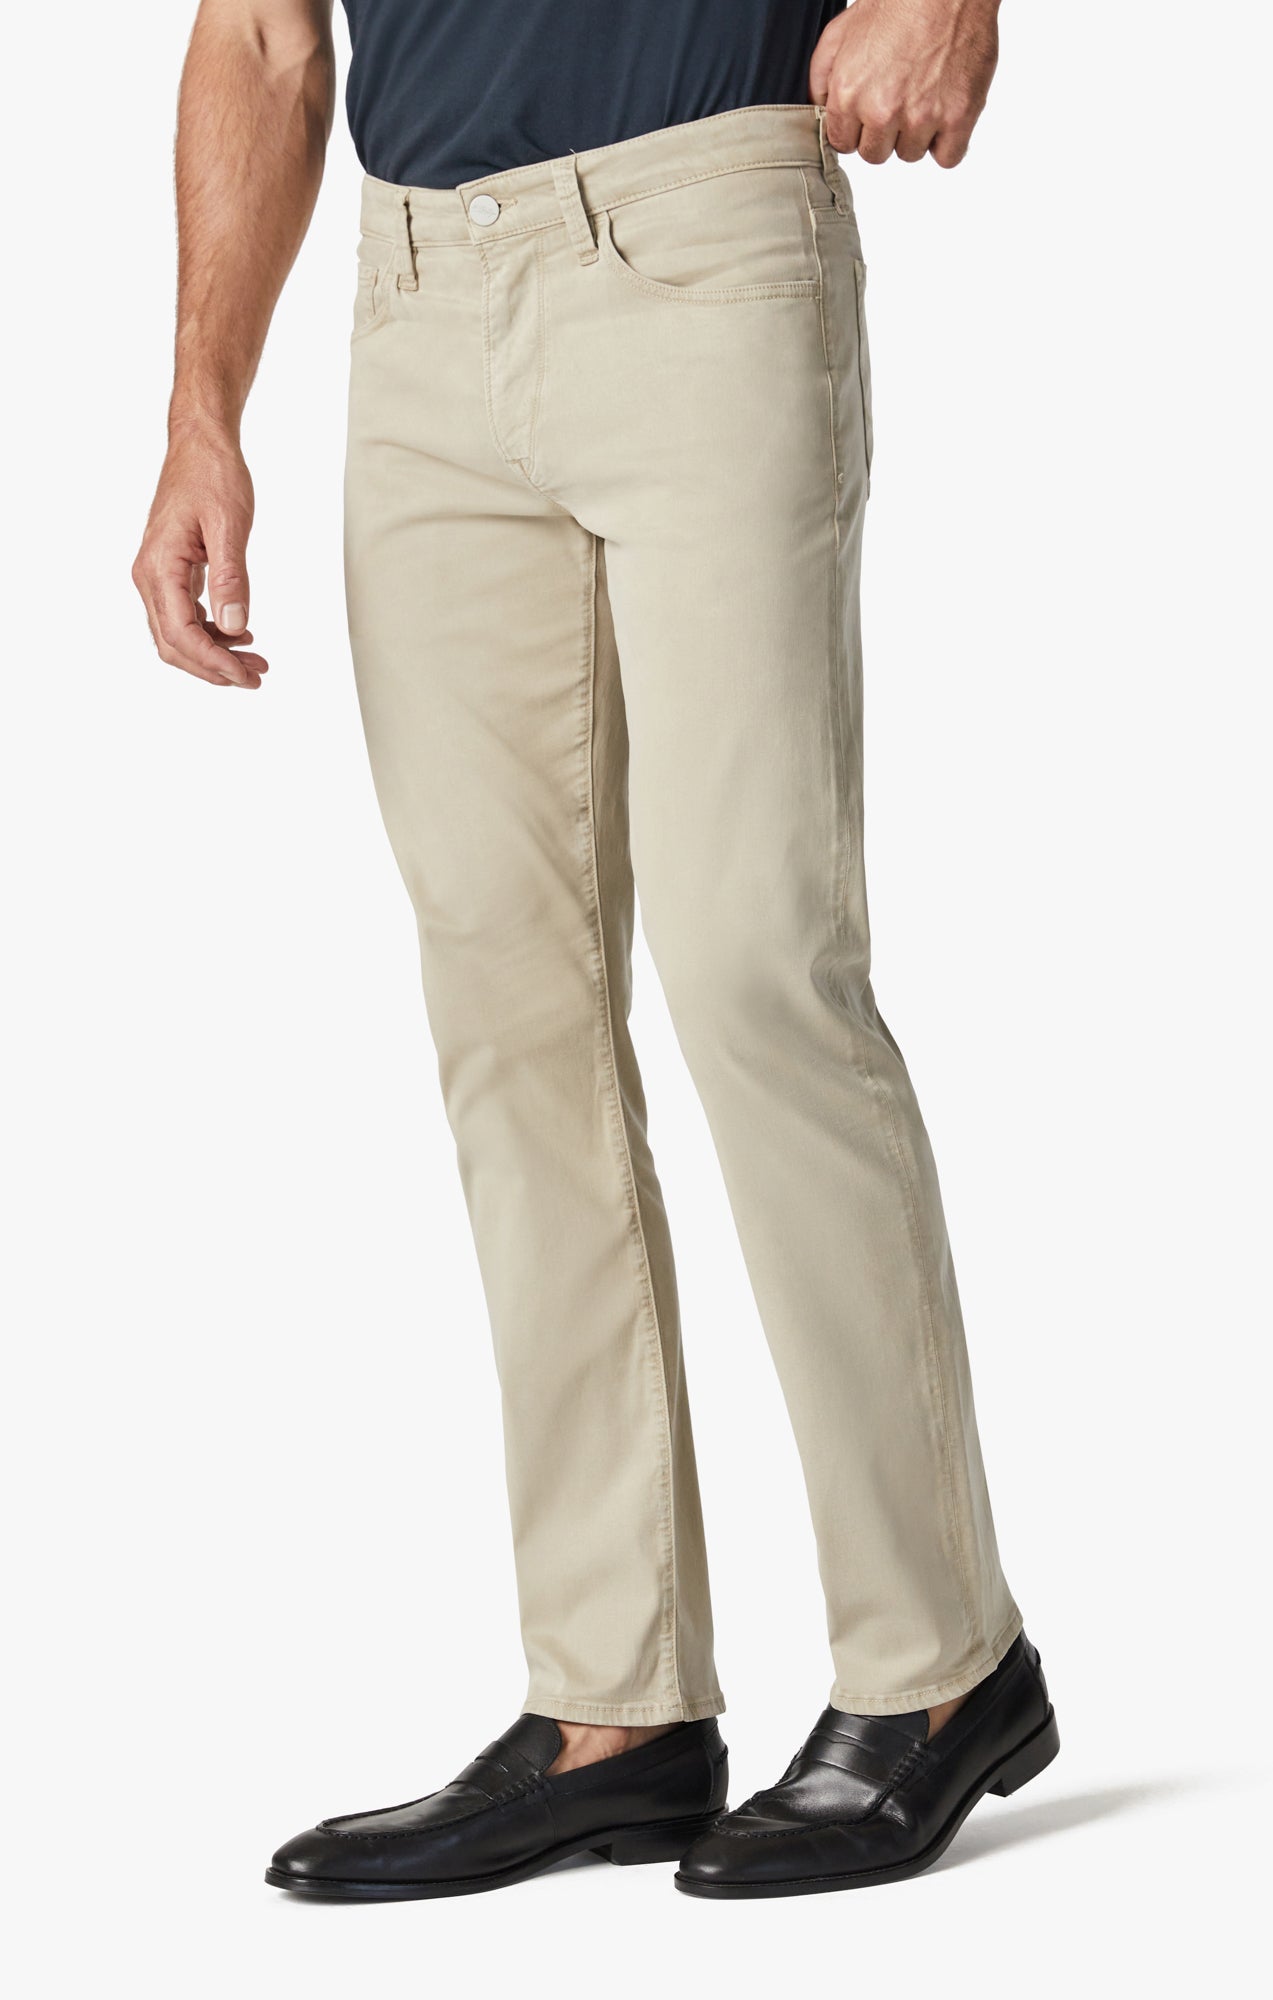 Courage Straight Leg Pants In Aluminum Twill Image 4